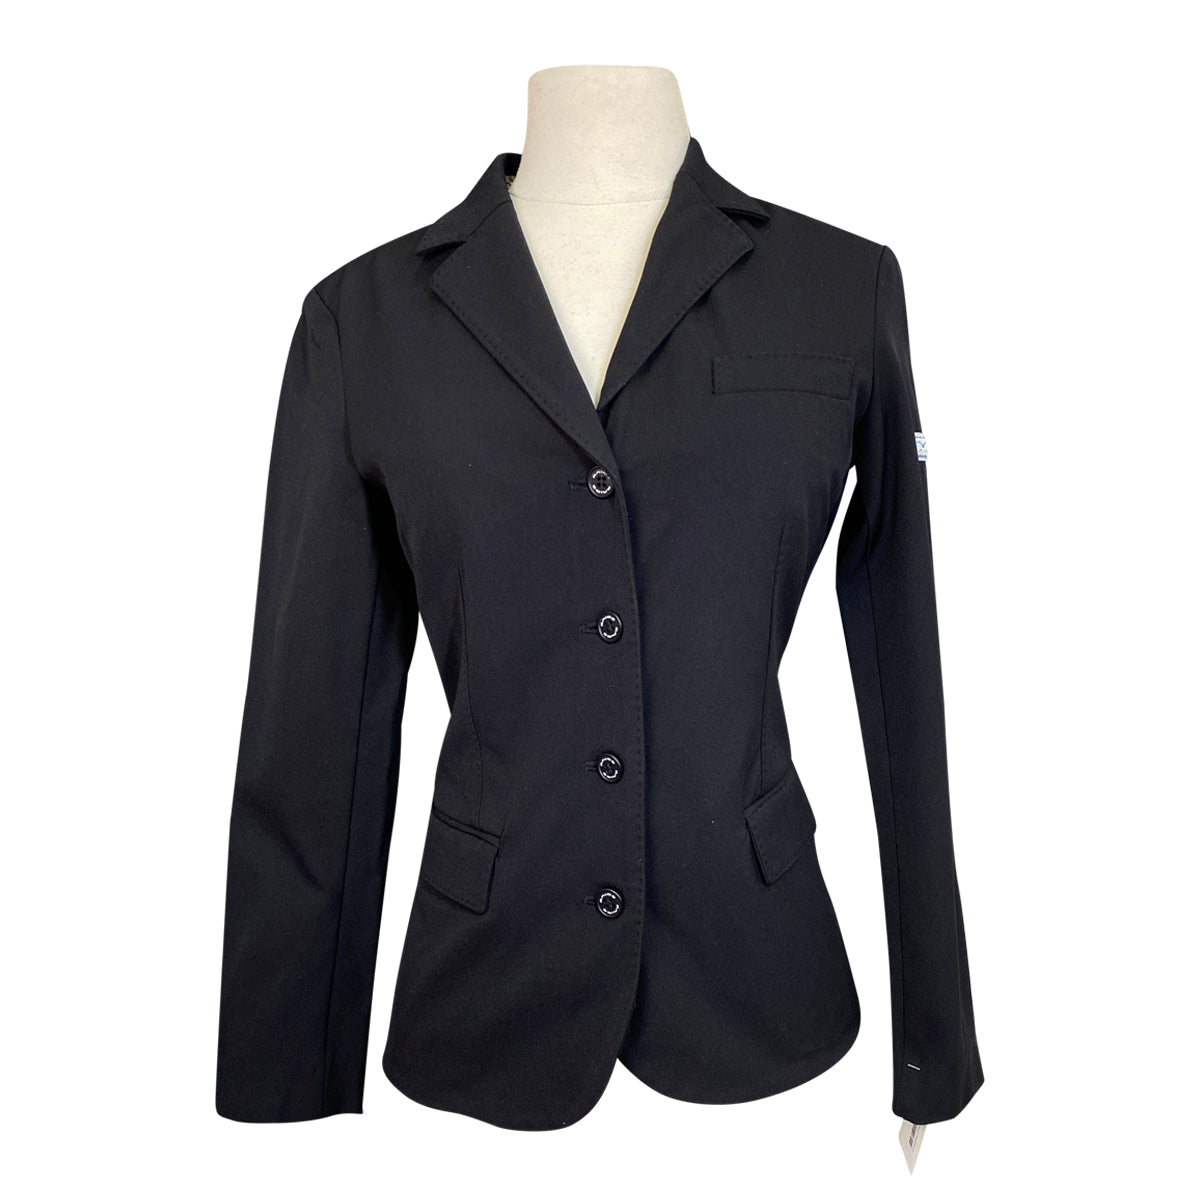 Animo Show Jacket in Black